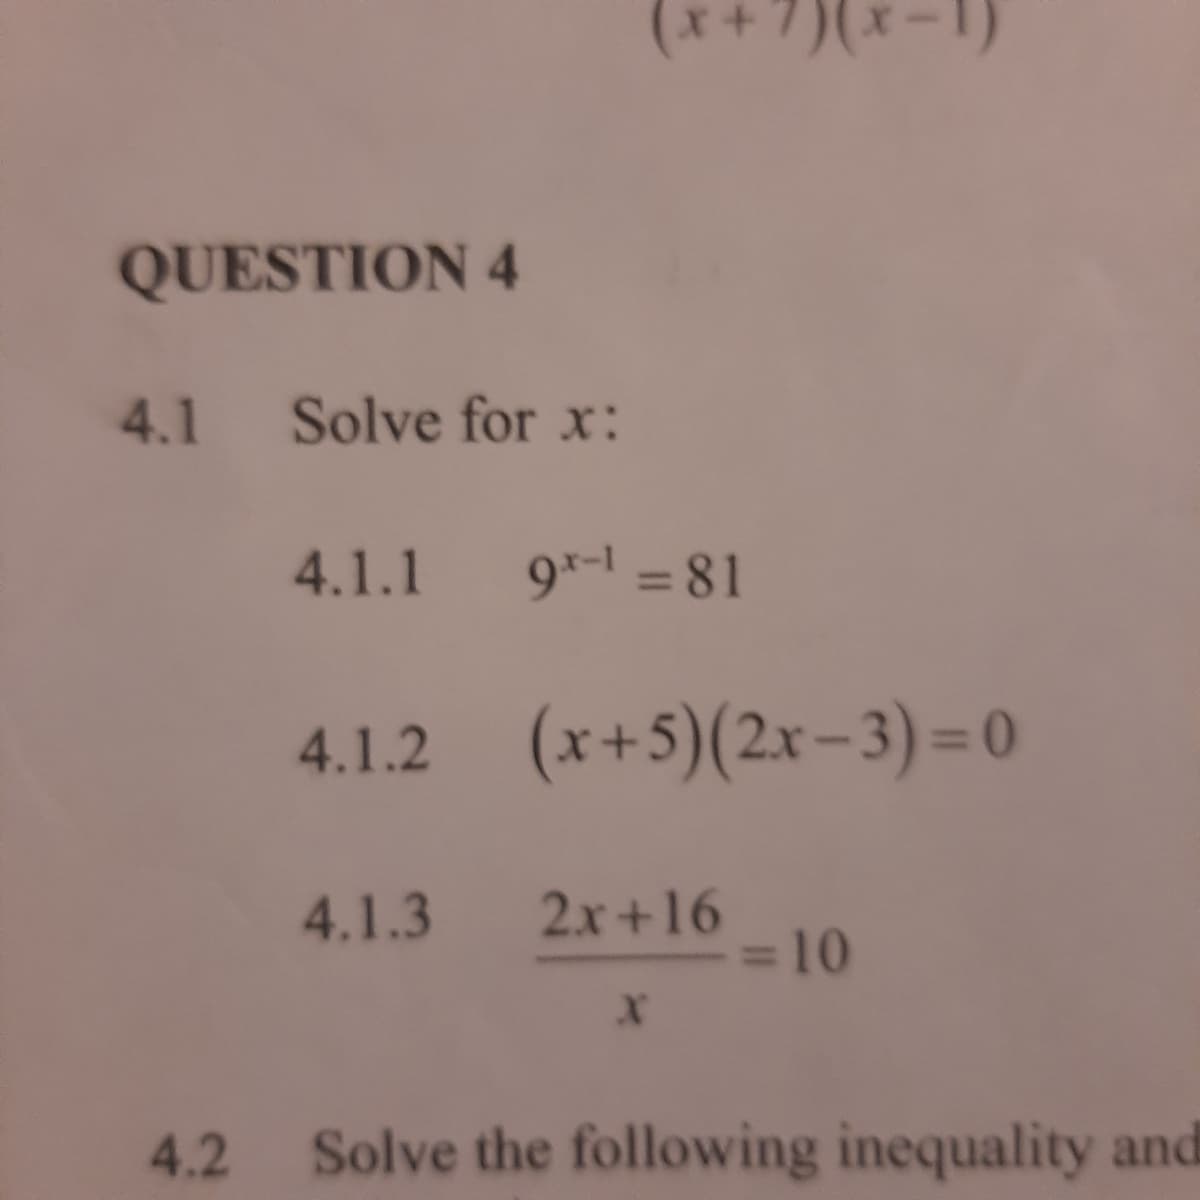 QUESTION 4
4.1 Solve for x:
4.1.1
9*- = 81
4.1.2 (x+5)(2x-3)= 0
4.1.3
2x+16
=D10
4.2
Solve the following inequality and
